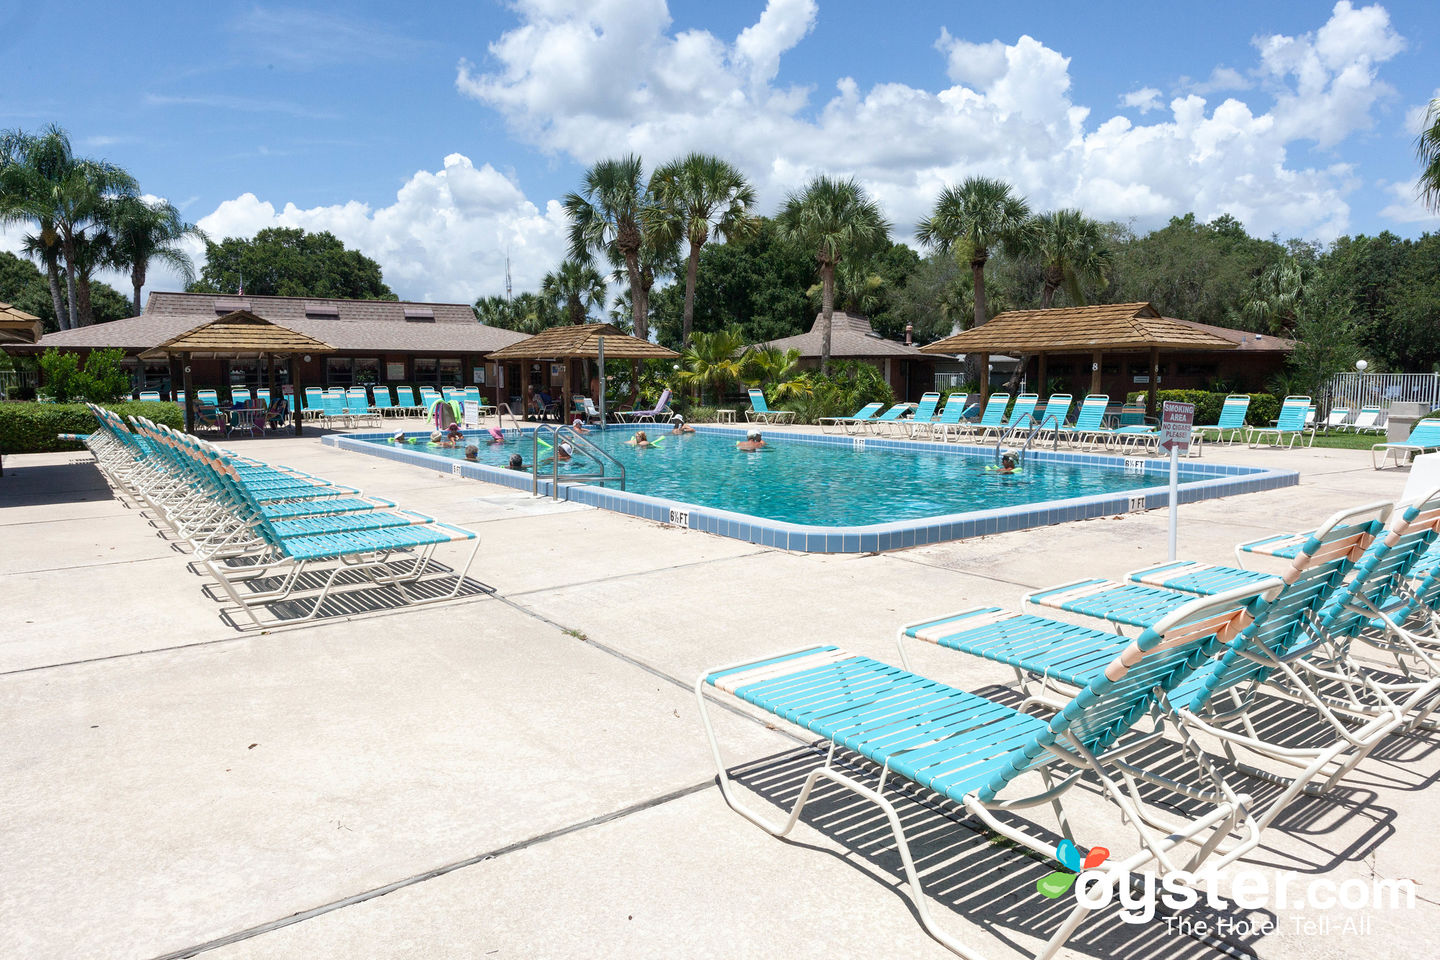 bee jay aragon recommends cypress cove nudist resort photos pic